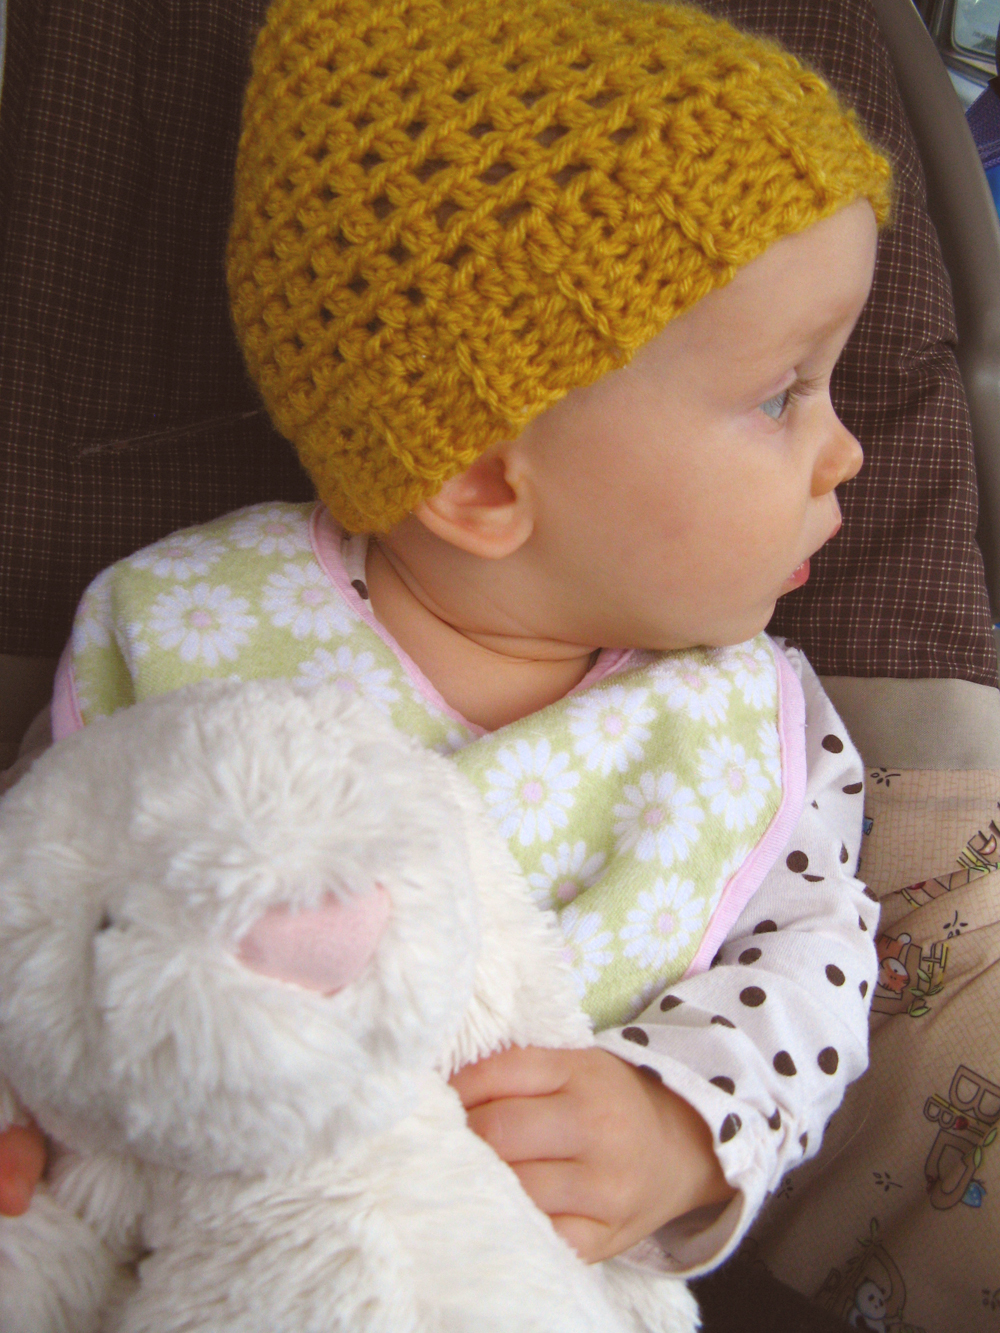 Aveline profile - with mustard yellow handmade hat and jellycat bunny